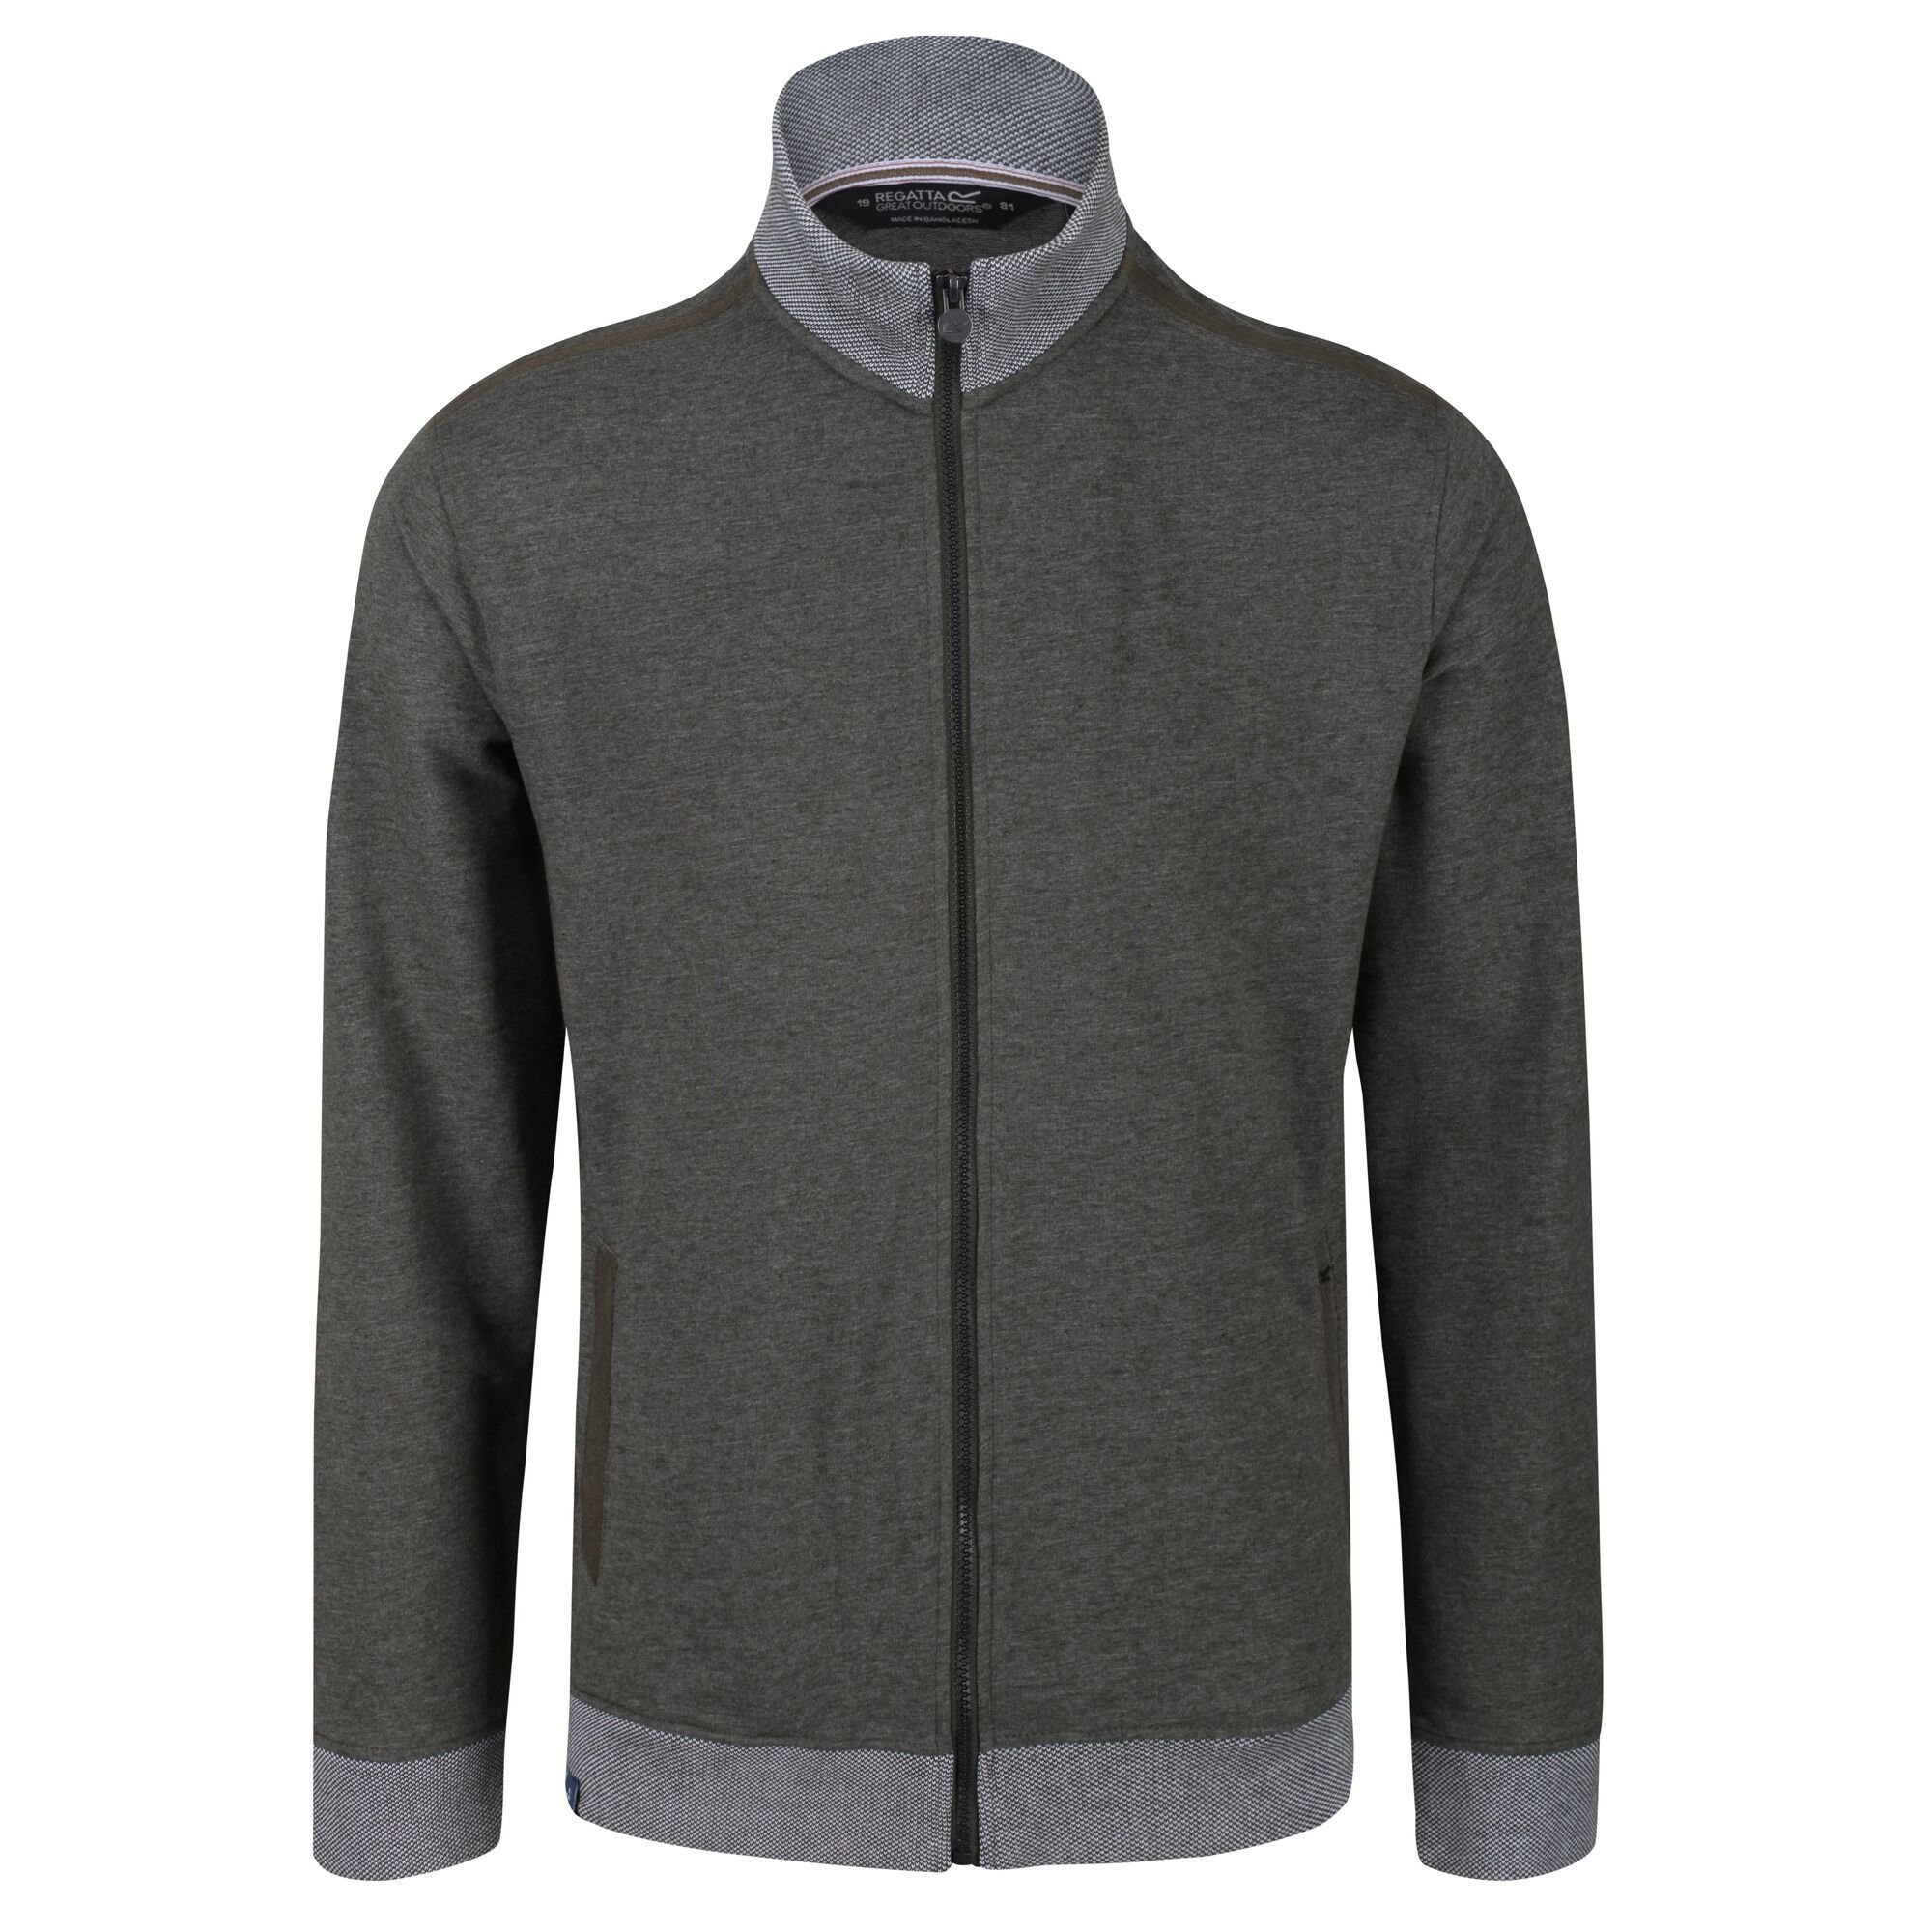 Material: 65% Polyester, 35% Cotton. 240gsm fabric zip fleece jacket with birdseye rib collar, cuff and hem. 2 lower pockets with herringbone tape detail.